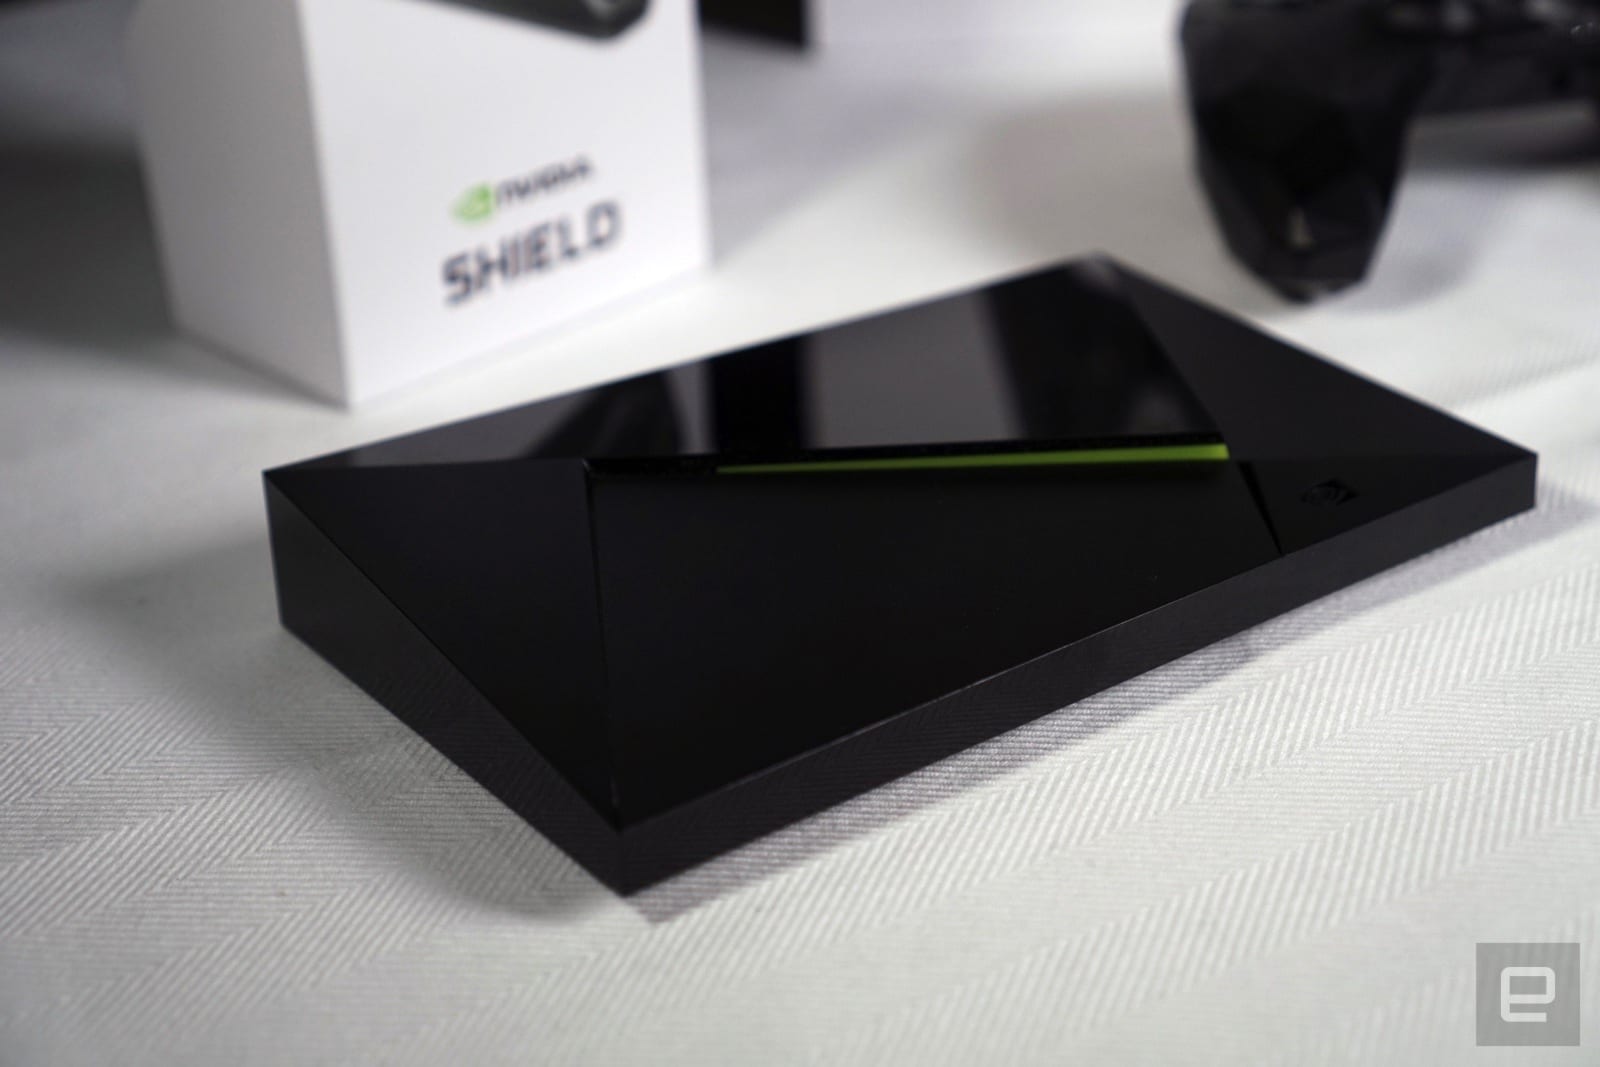 Pros and cons: Our quick verdict on NVIDIA's new Shield TV